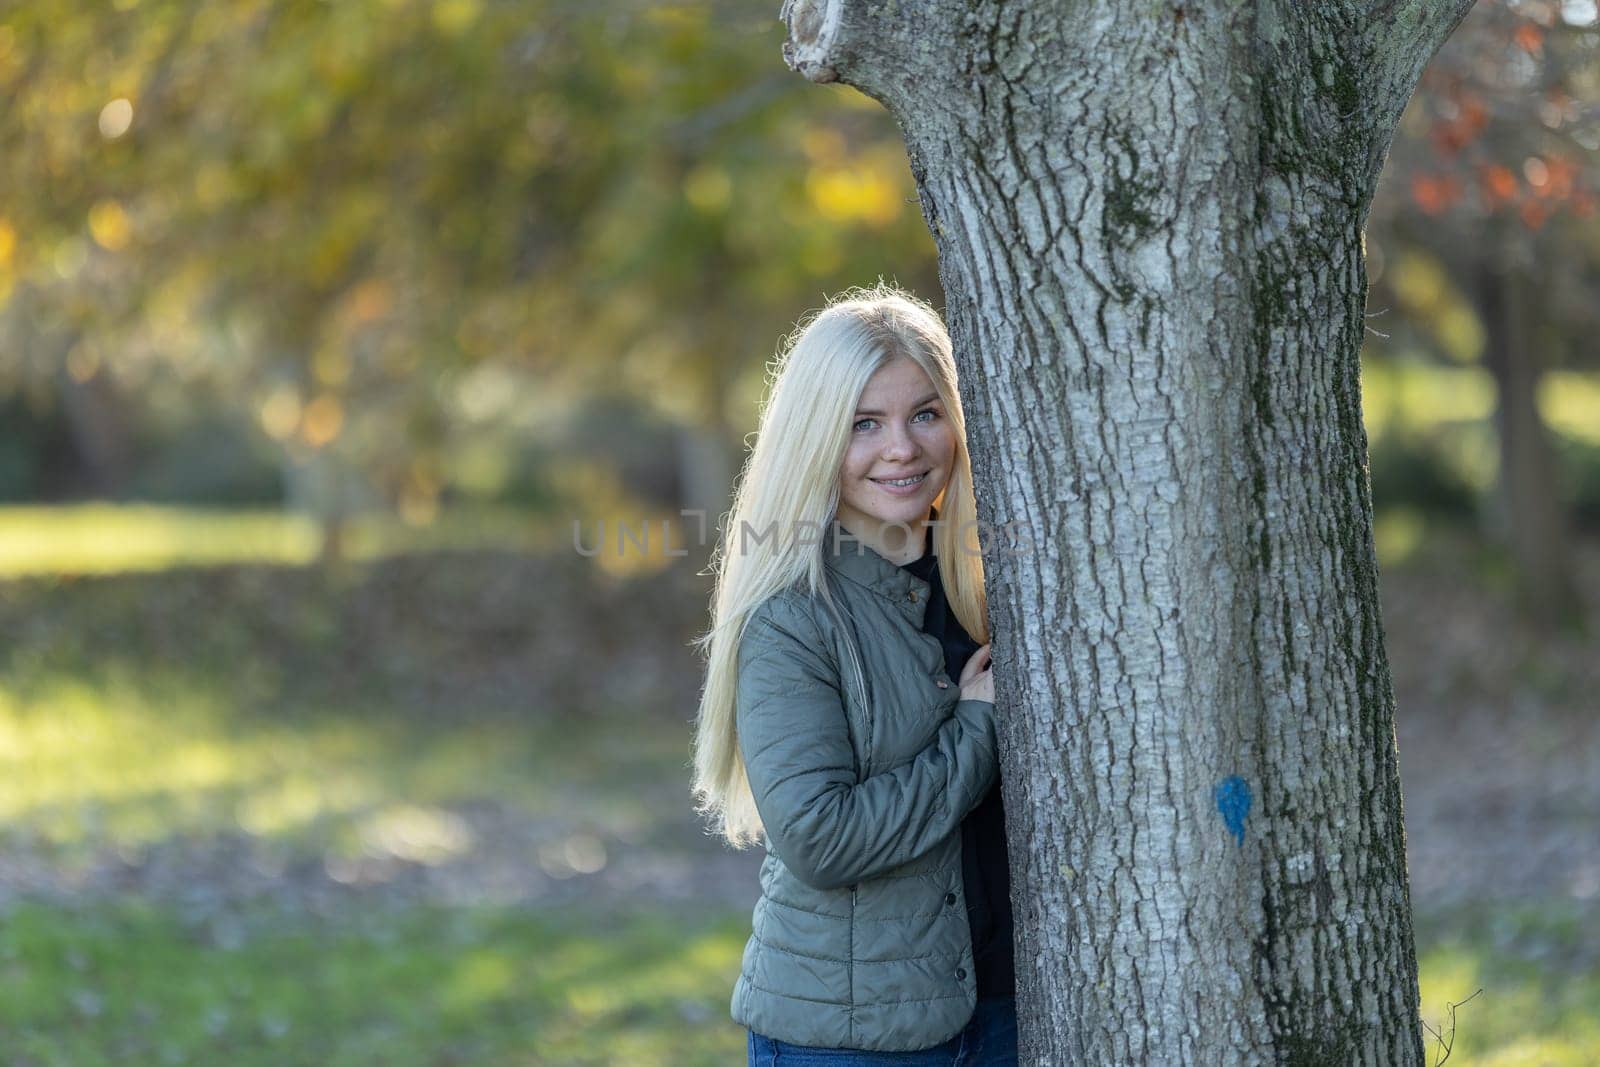 A young woman with braces is standing next to a tree in a park, smiling.